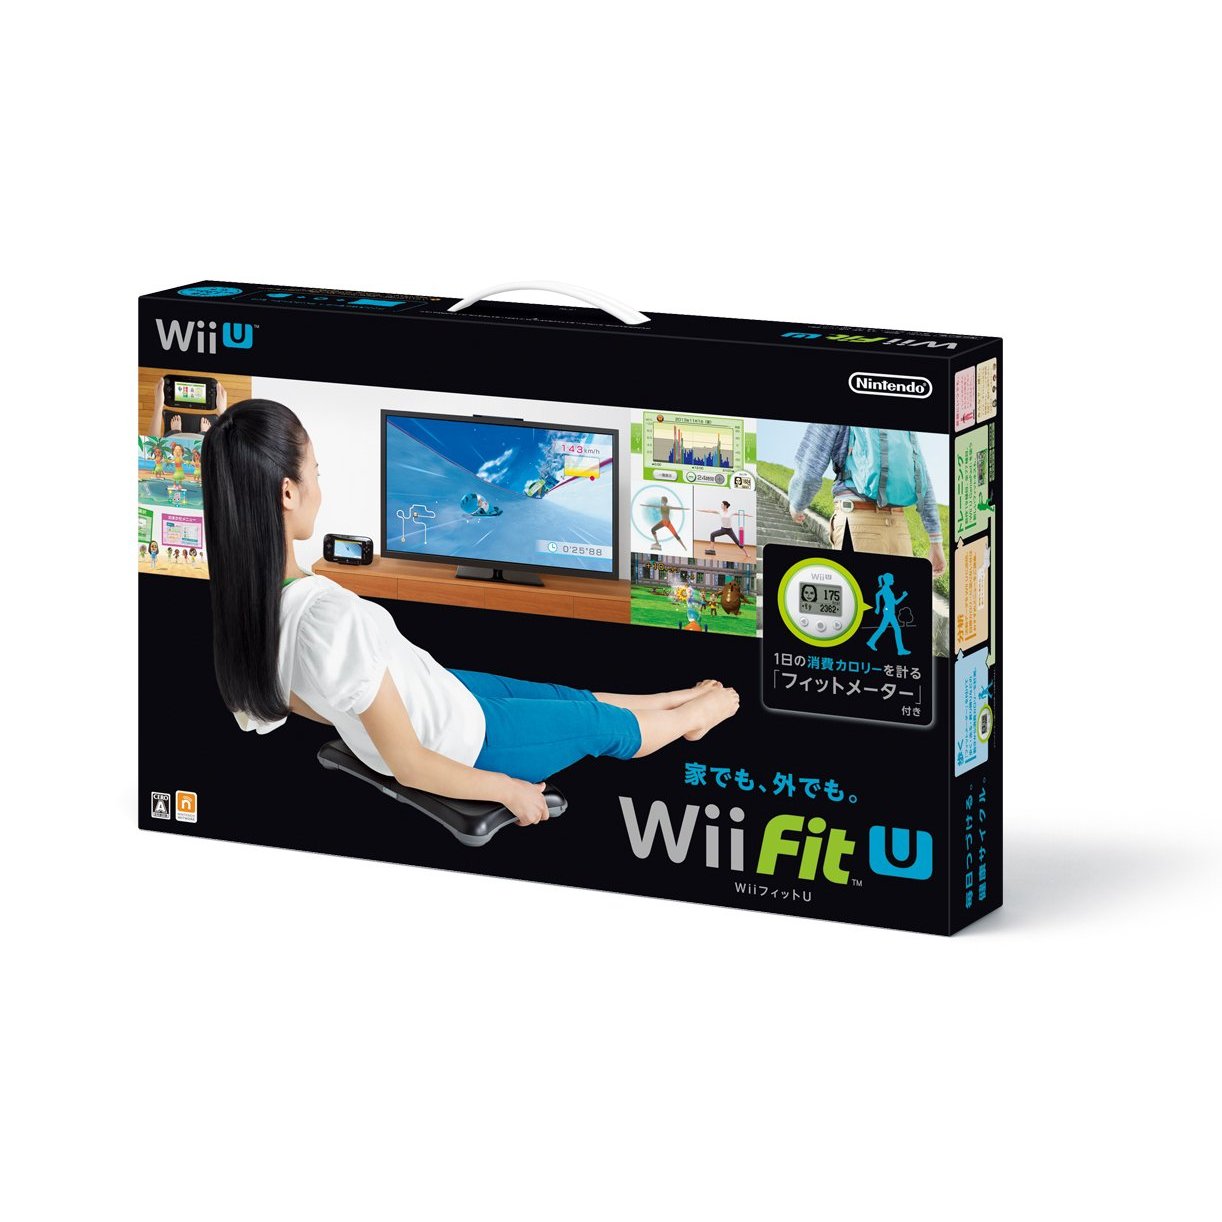 Wii Fit U Archives - Page 2 of 4 - Nintendo Everything